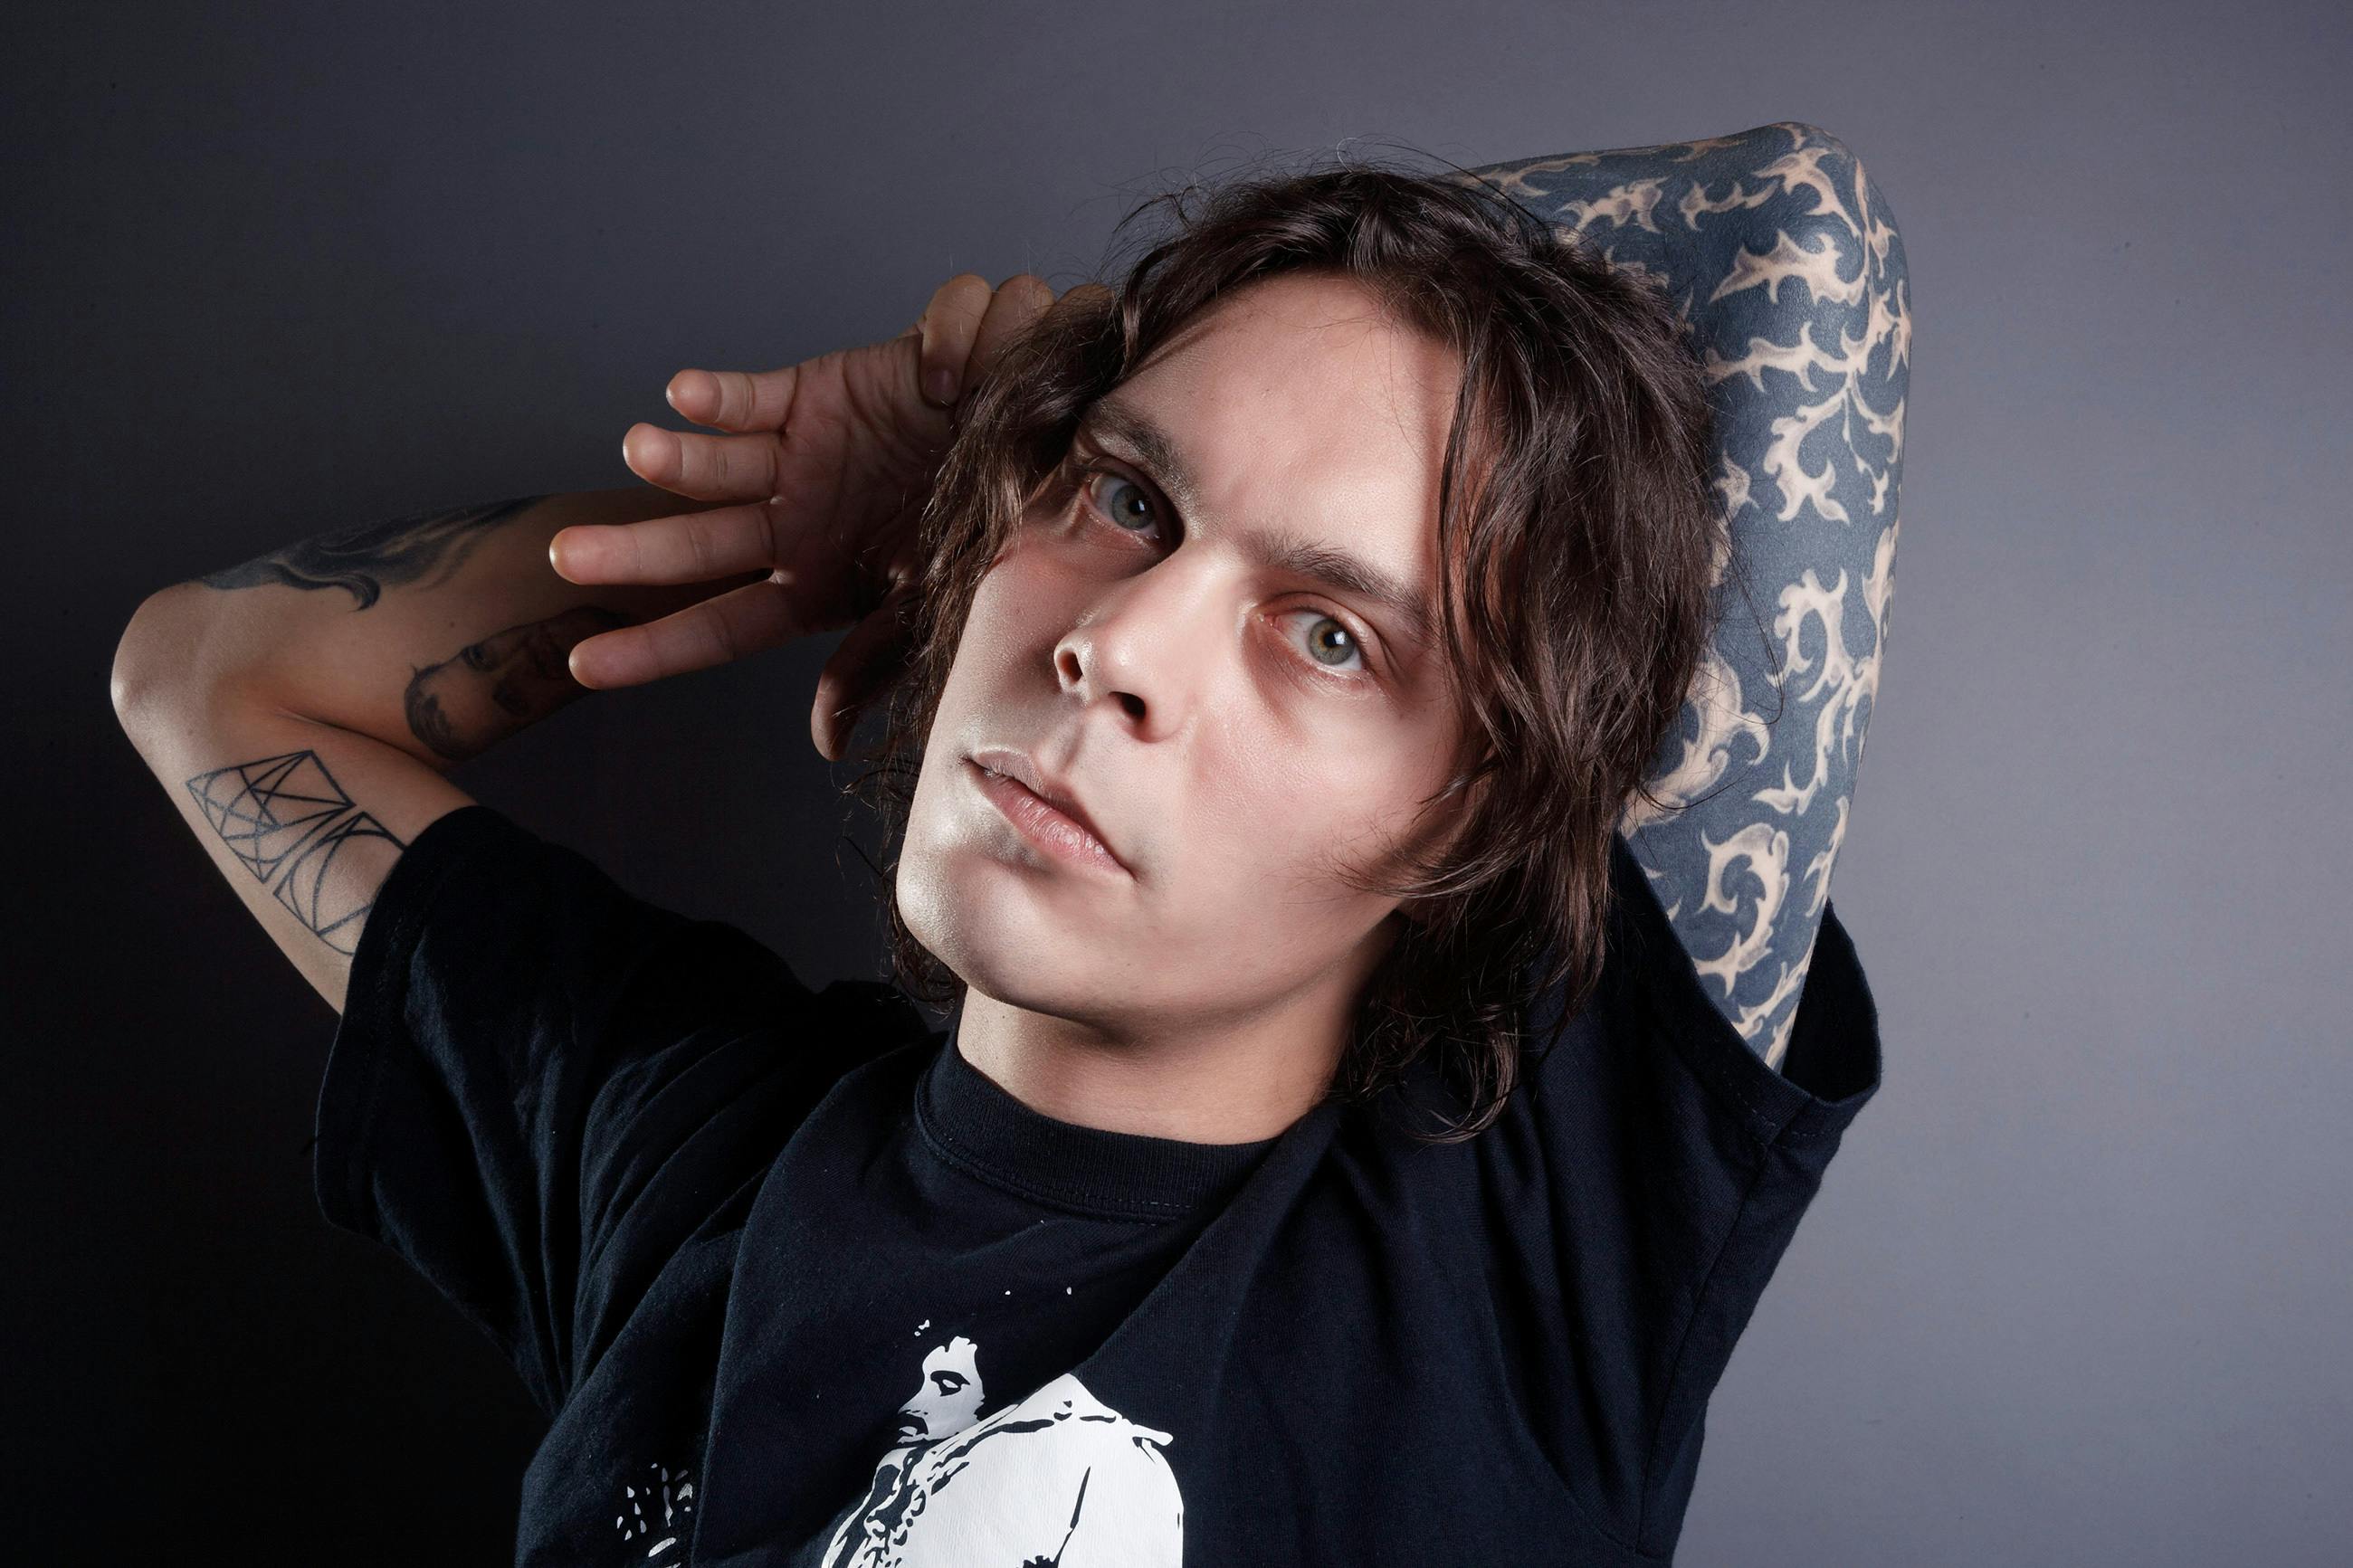 HIM’s Ville Valo confirms he’s releasing new music this Friday